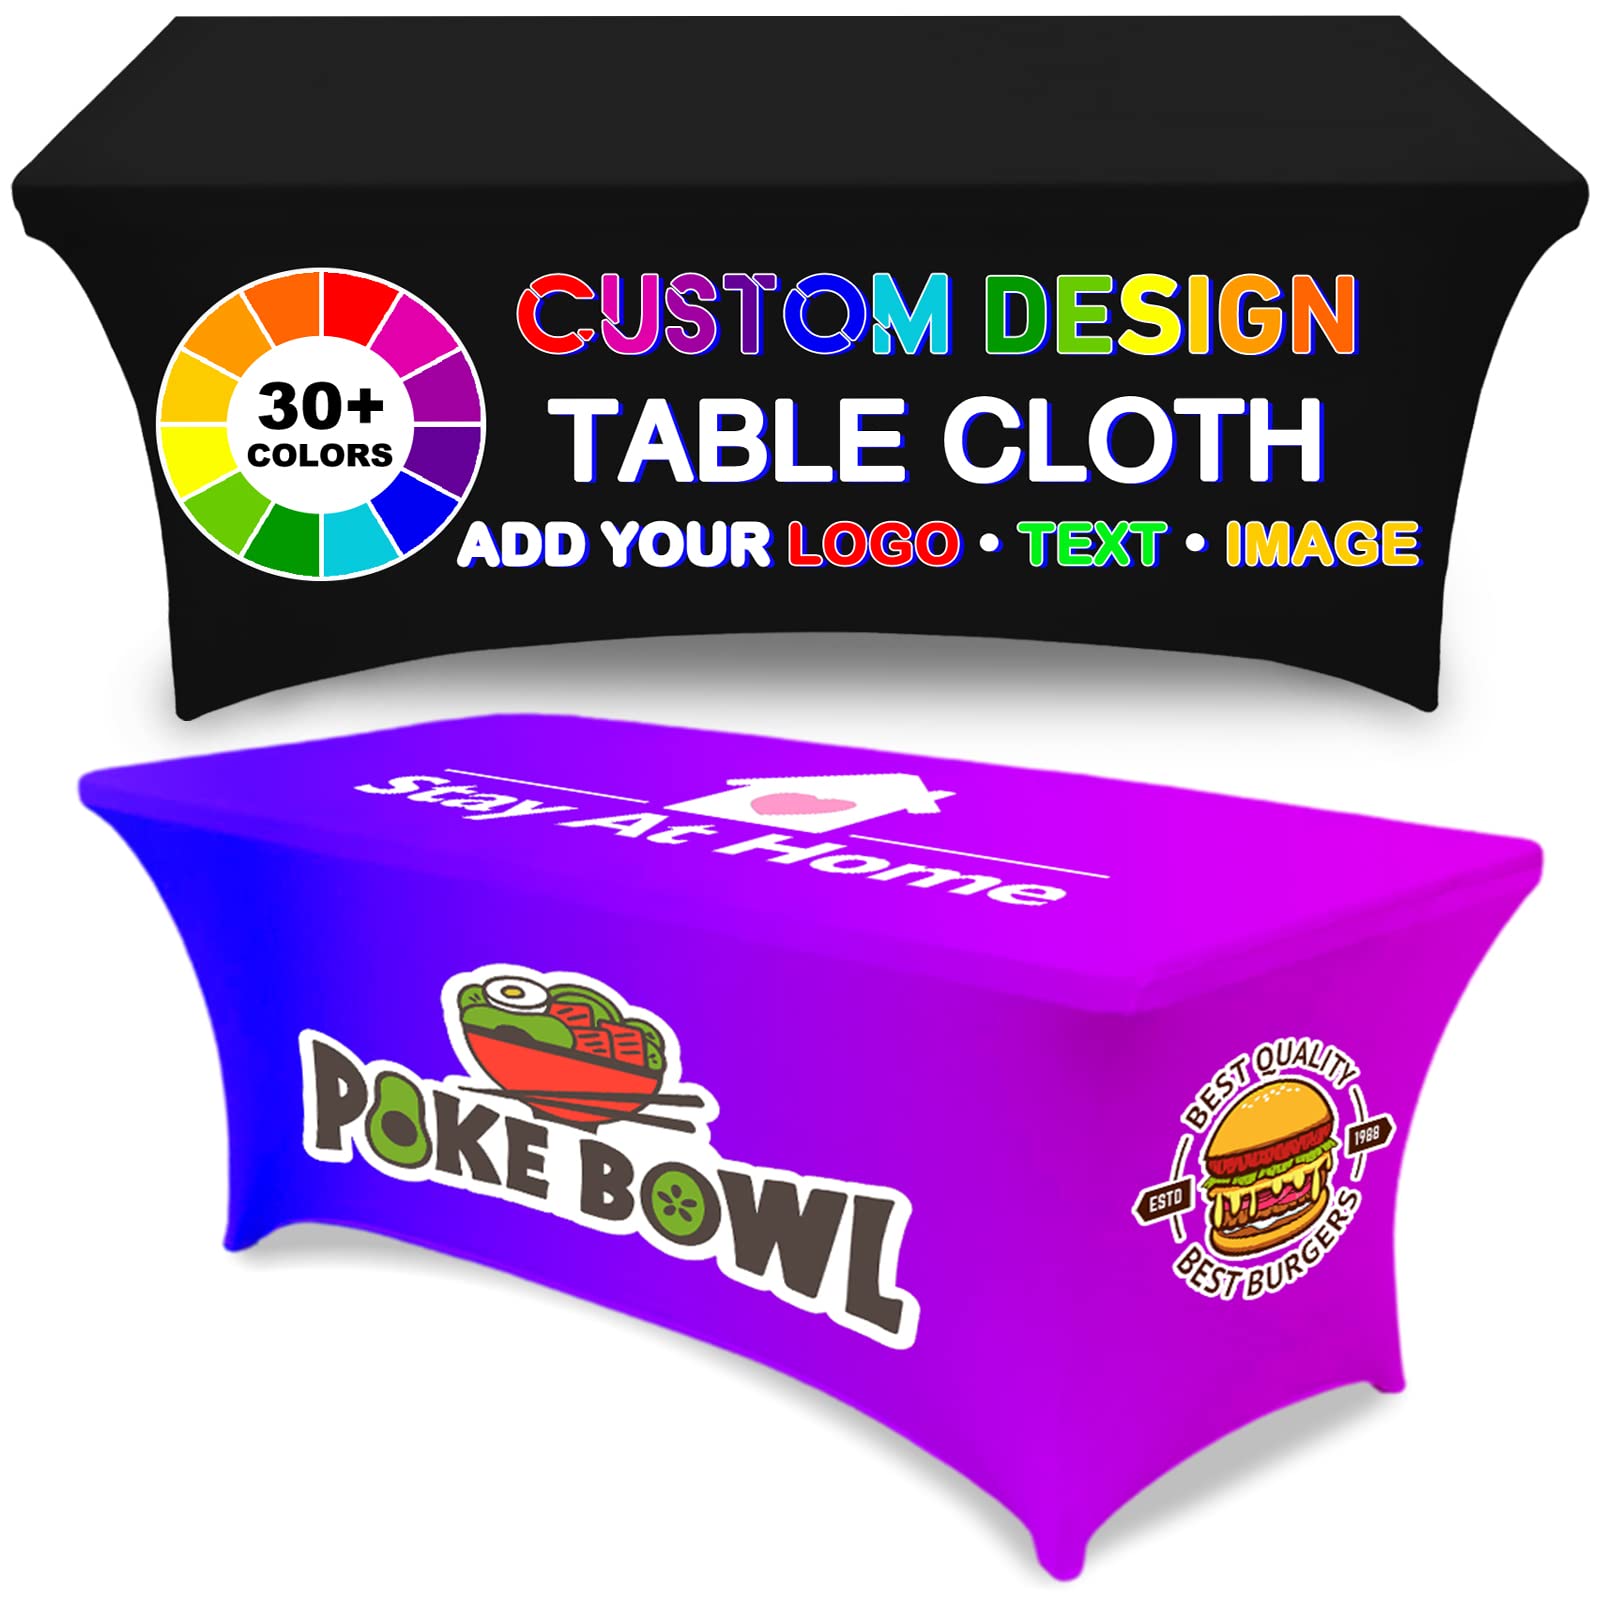 Table Cloth Banner | Transform Your Tabletop with Elegant Cloth Banner | Cloth Material